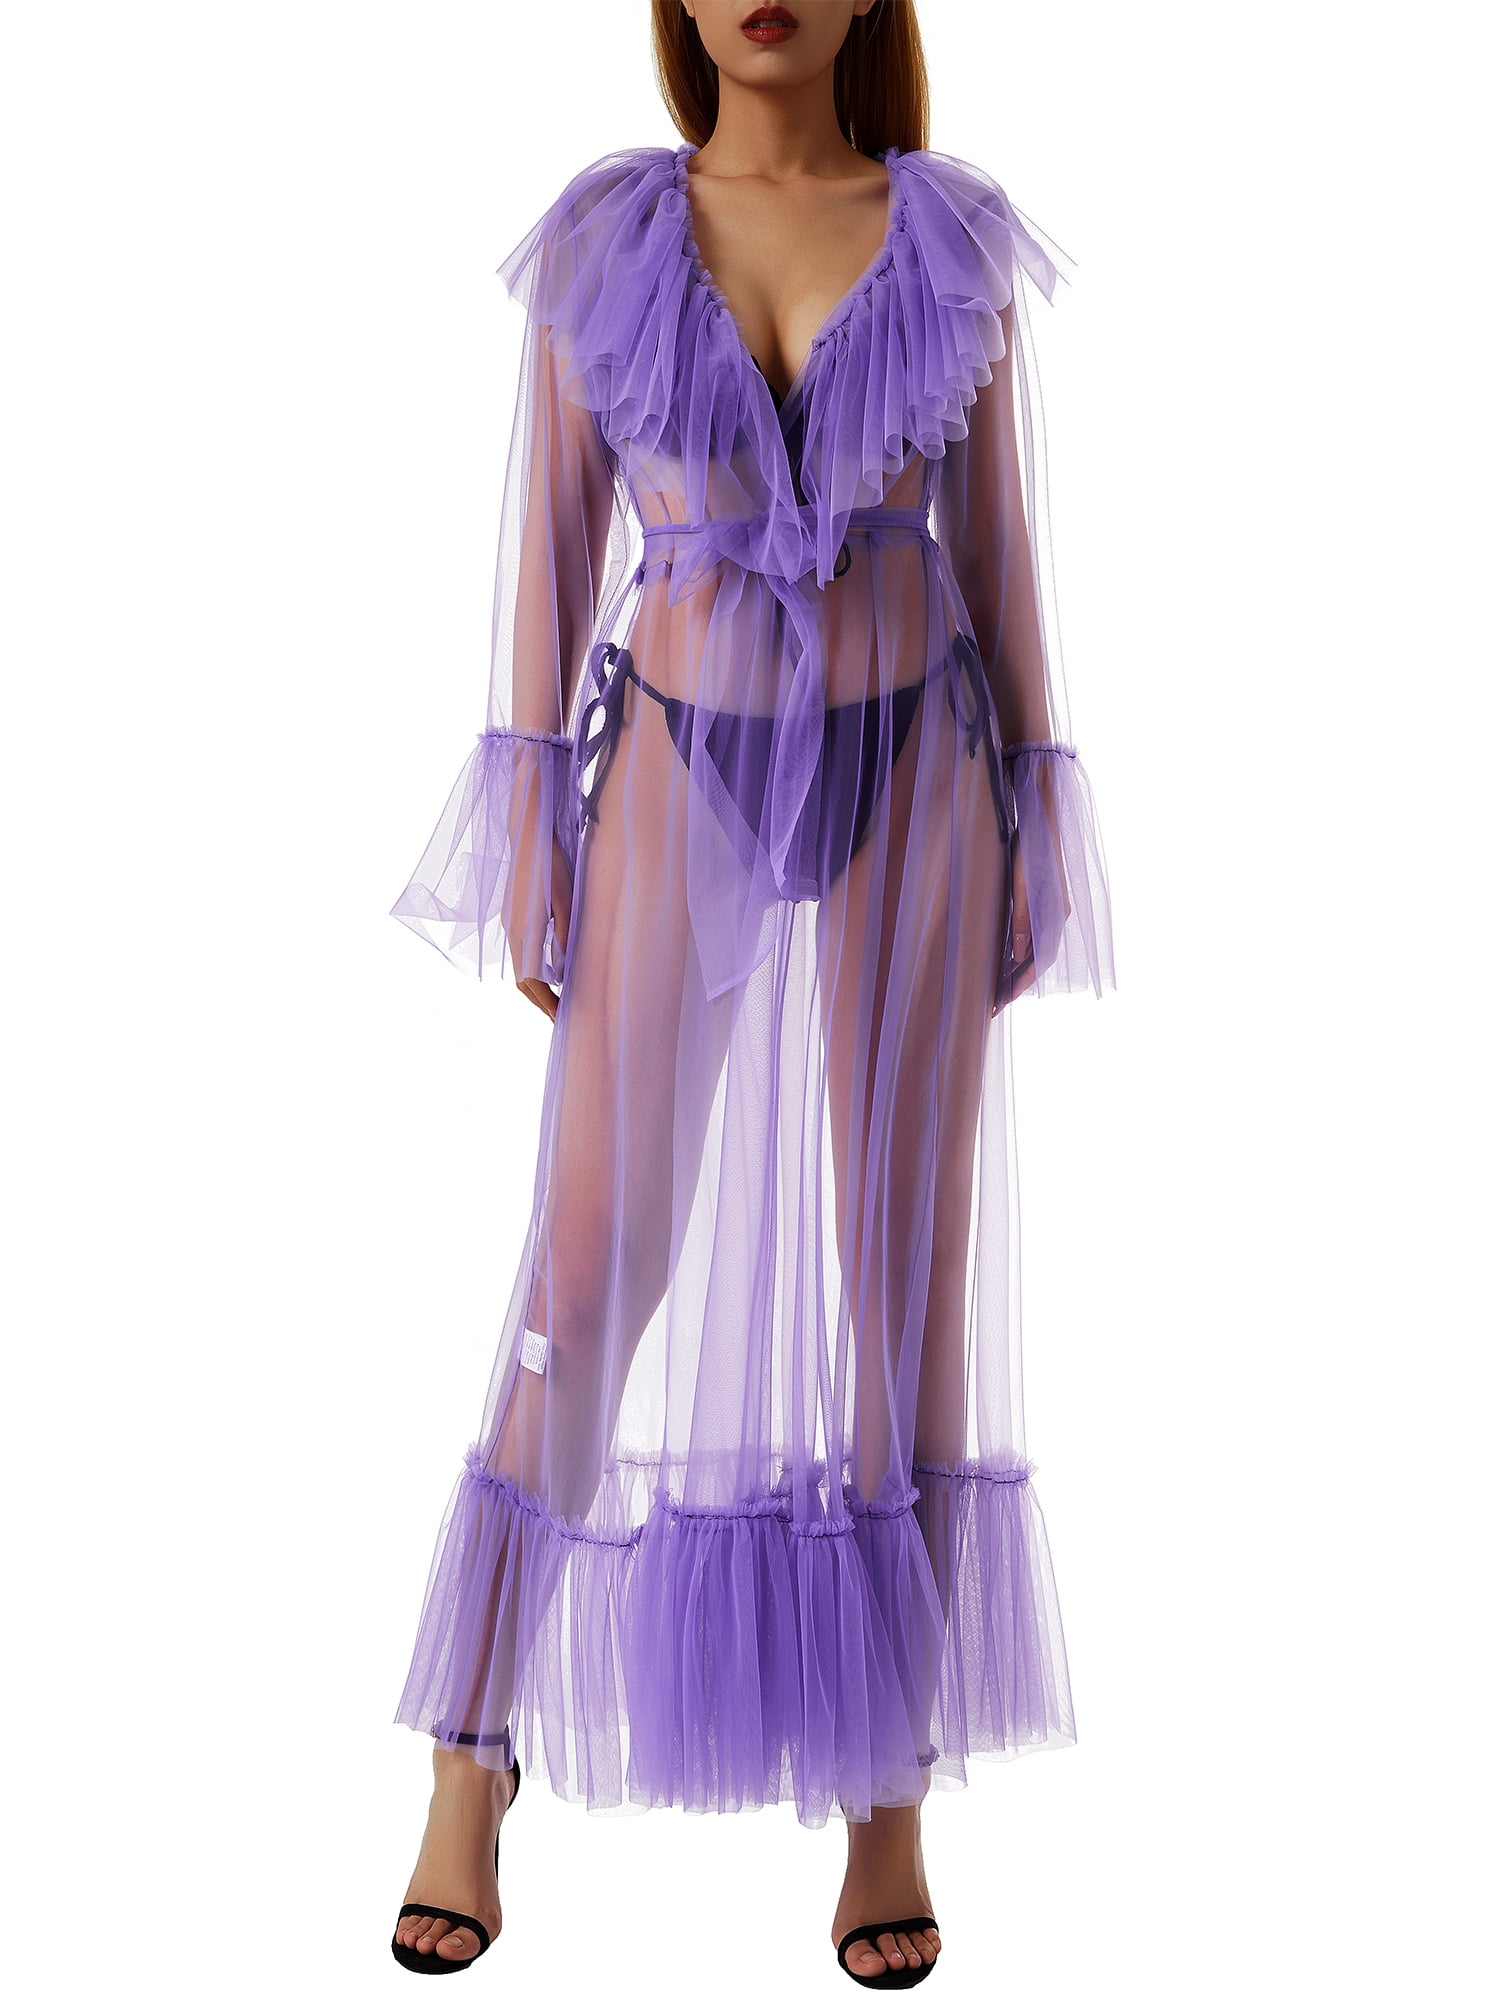 Queen Purple Robe Perspective Sheer Sleepwear with Fur - China Nightgown  and Sexy Nightgown price